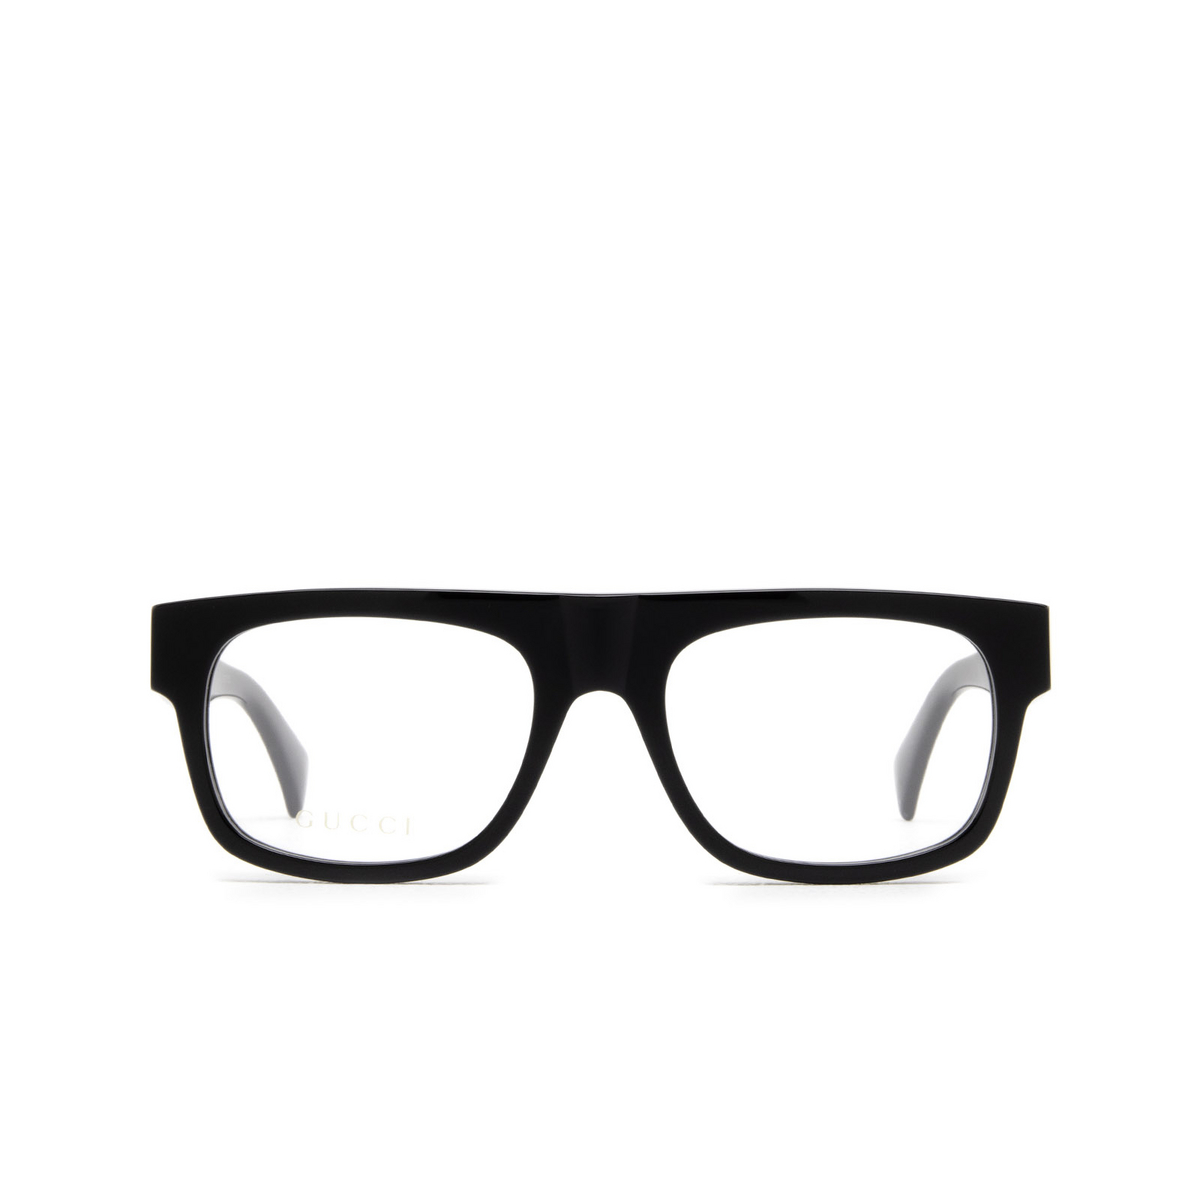 Gucci® Rectangle Eyeglasses: GG1137O color Black 001 - front view.